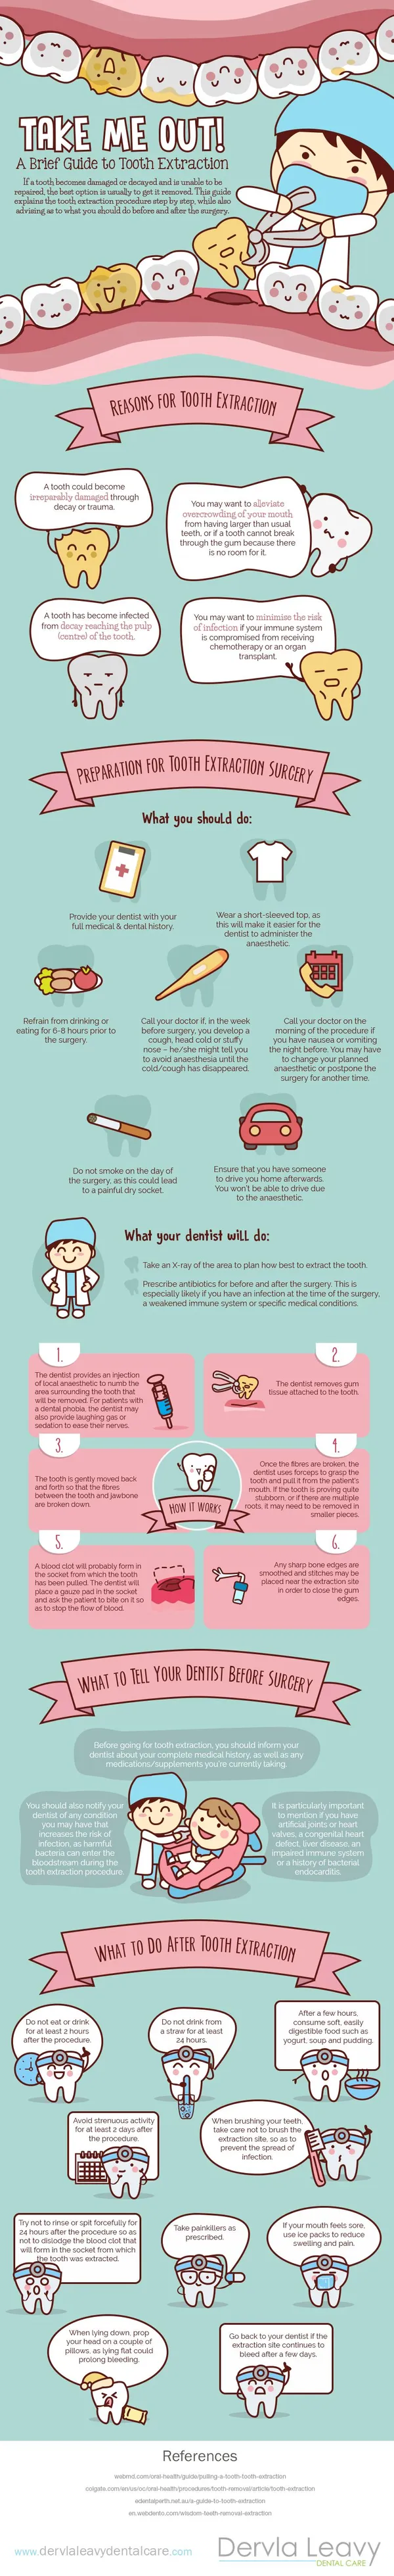 Dervla Leavy IG A Brief Guide to Tooth Extraction